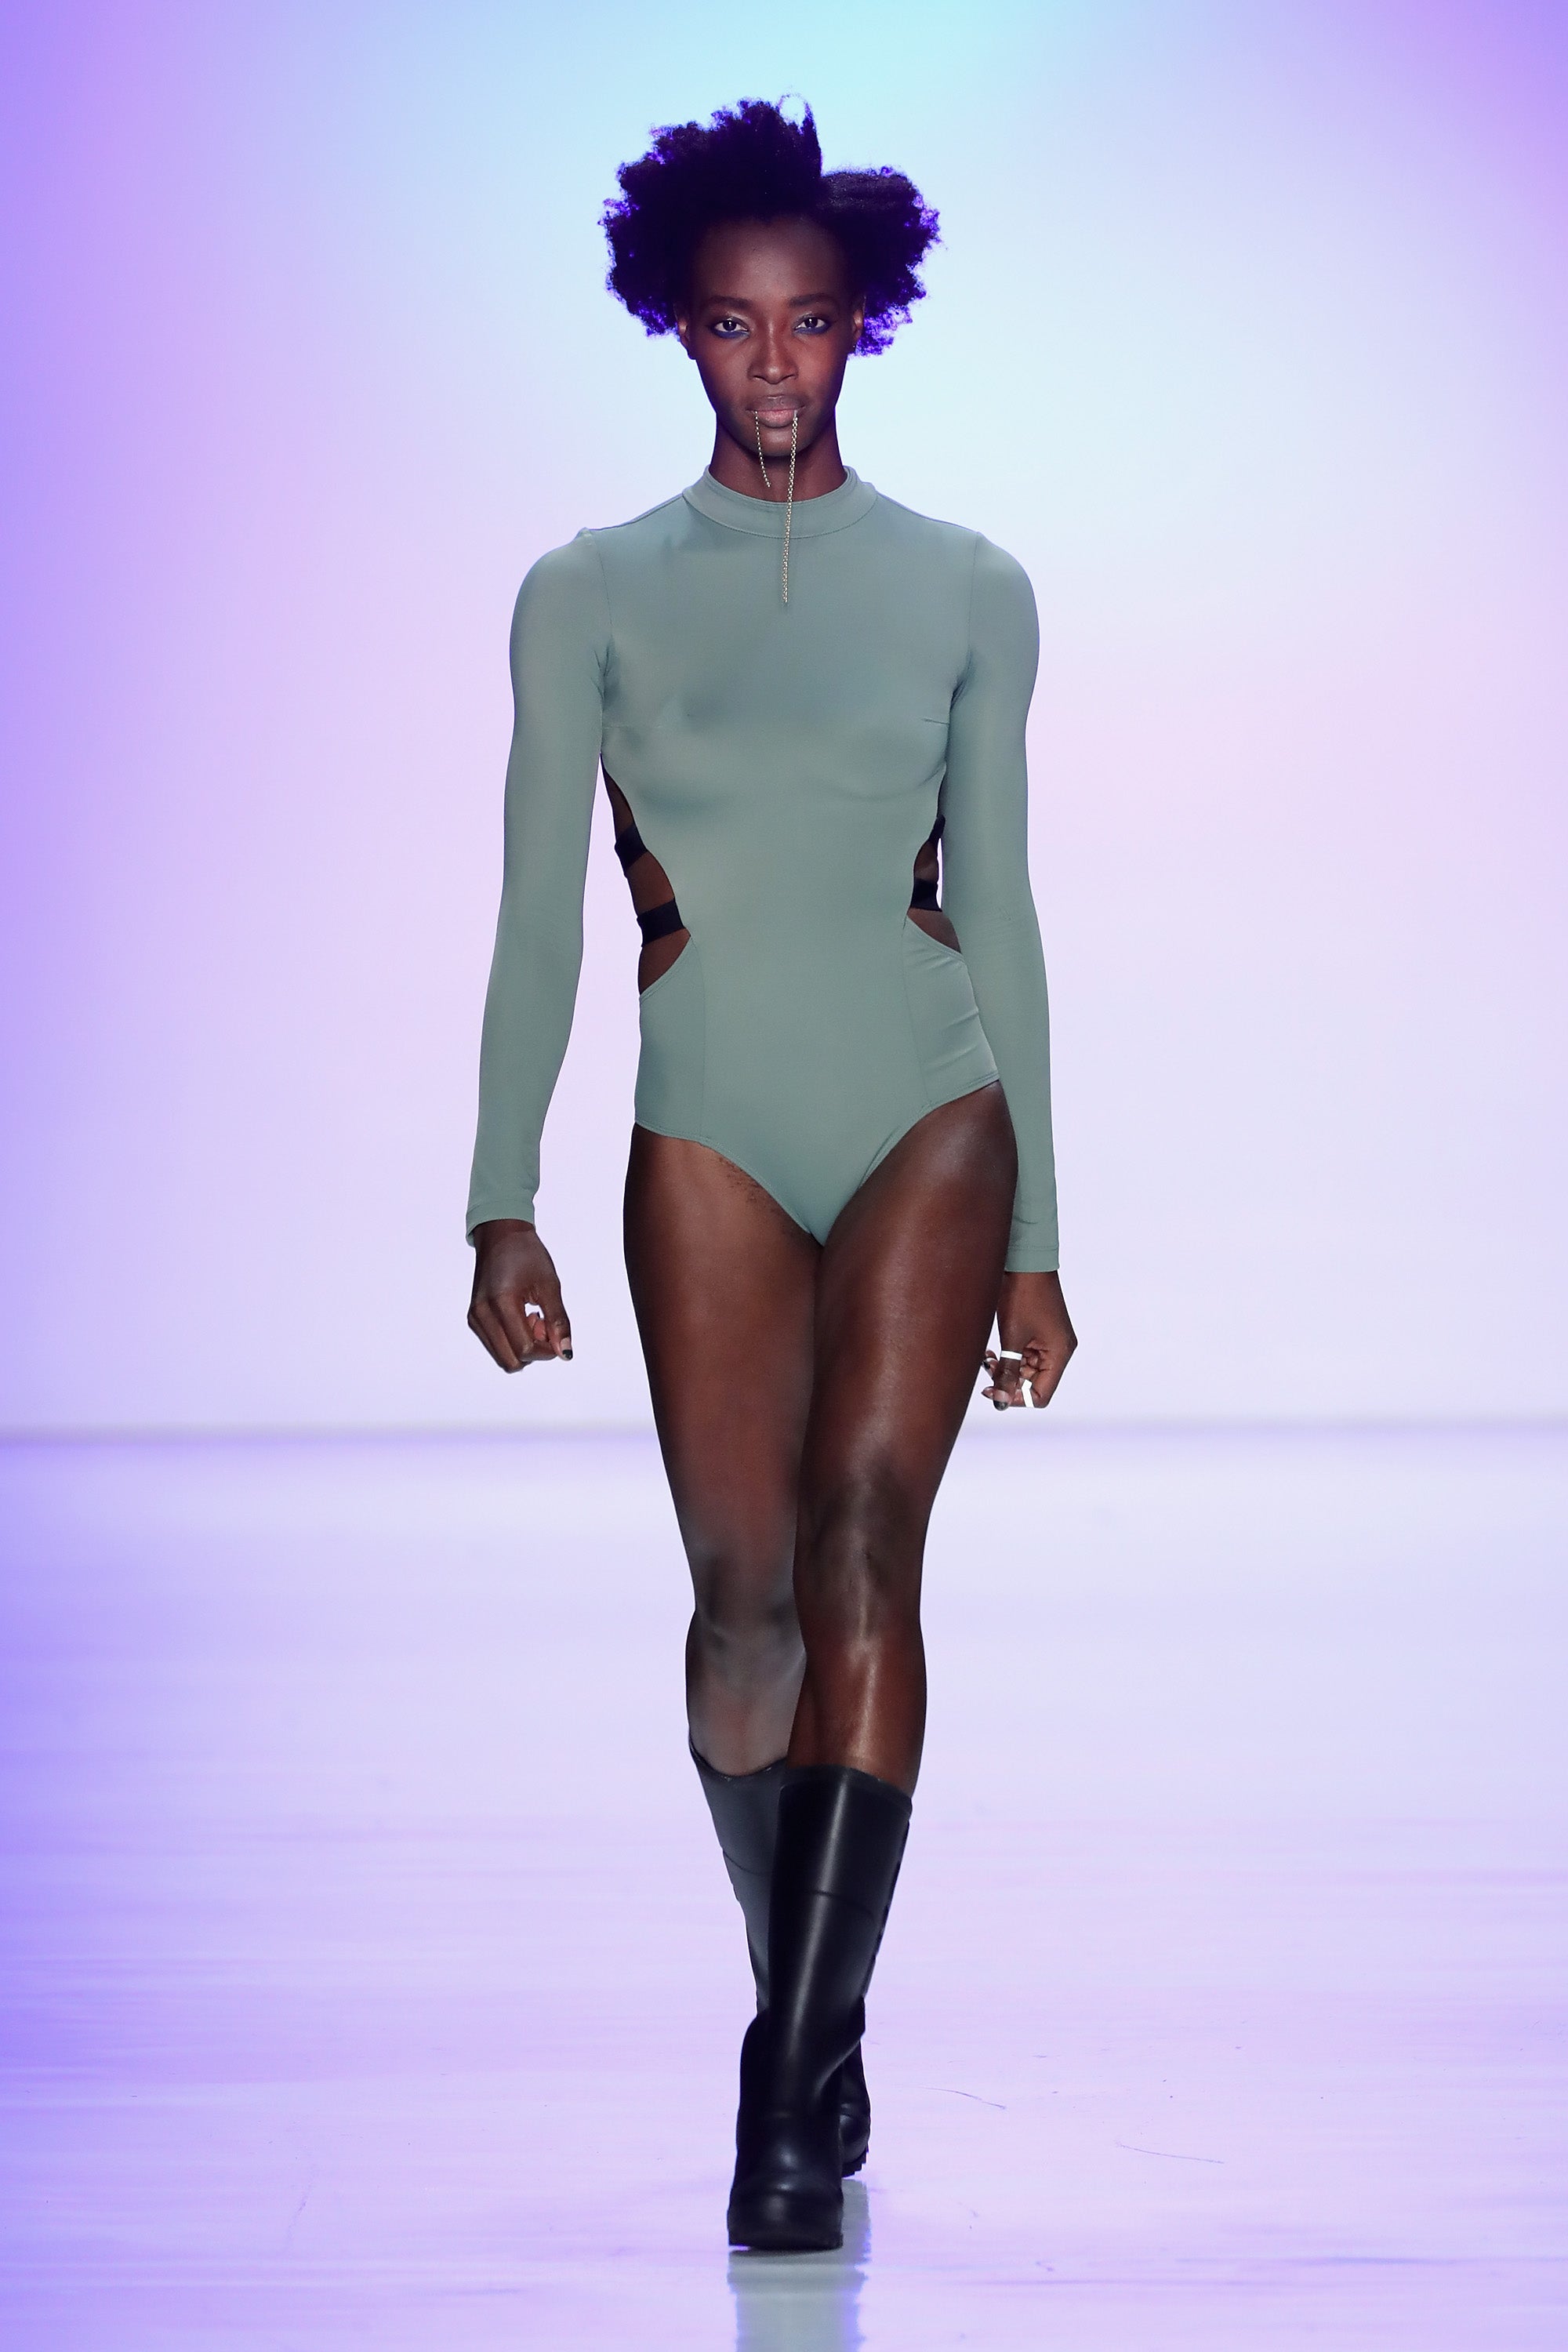 Every Beautiful Black Model on the Runway at New York Fashion Week
